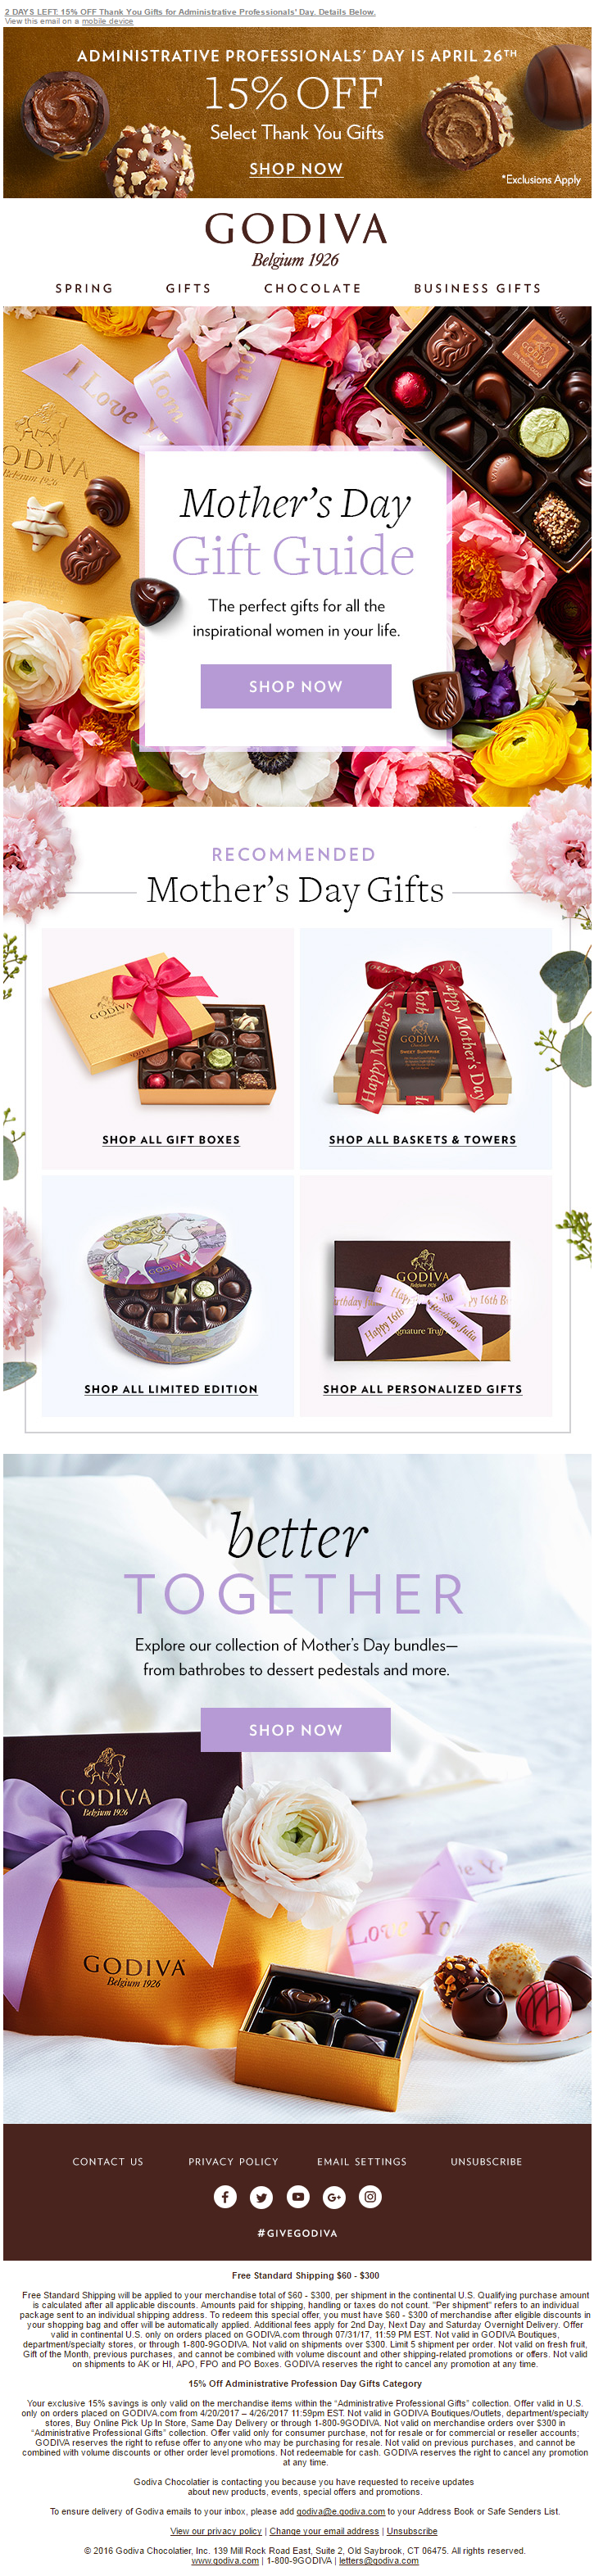 GODIVA-Mothers-Day-Email